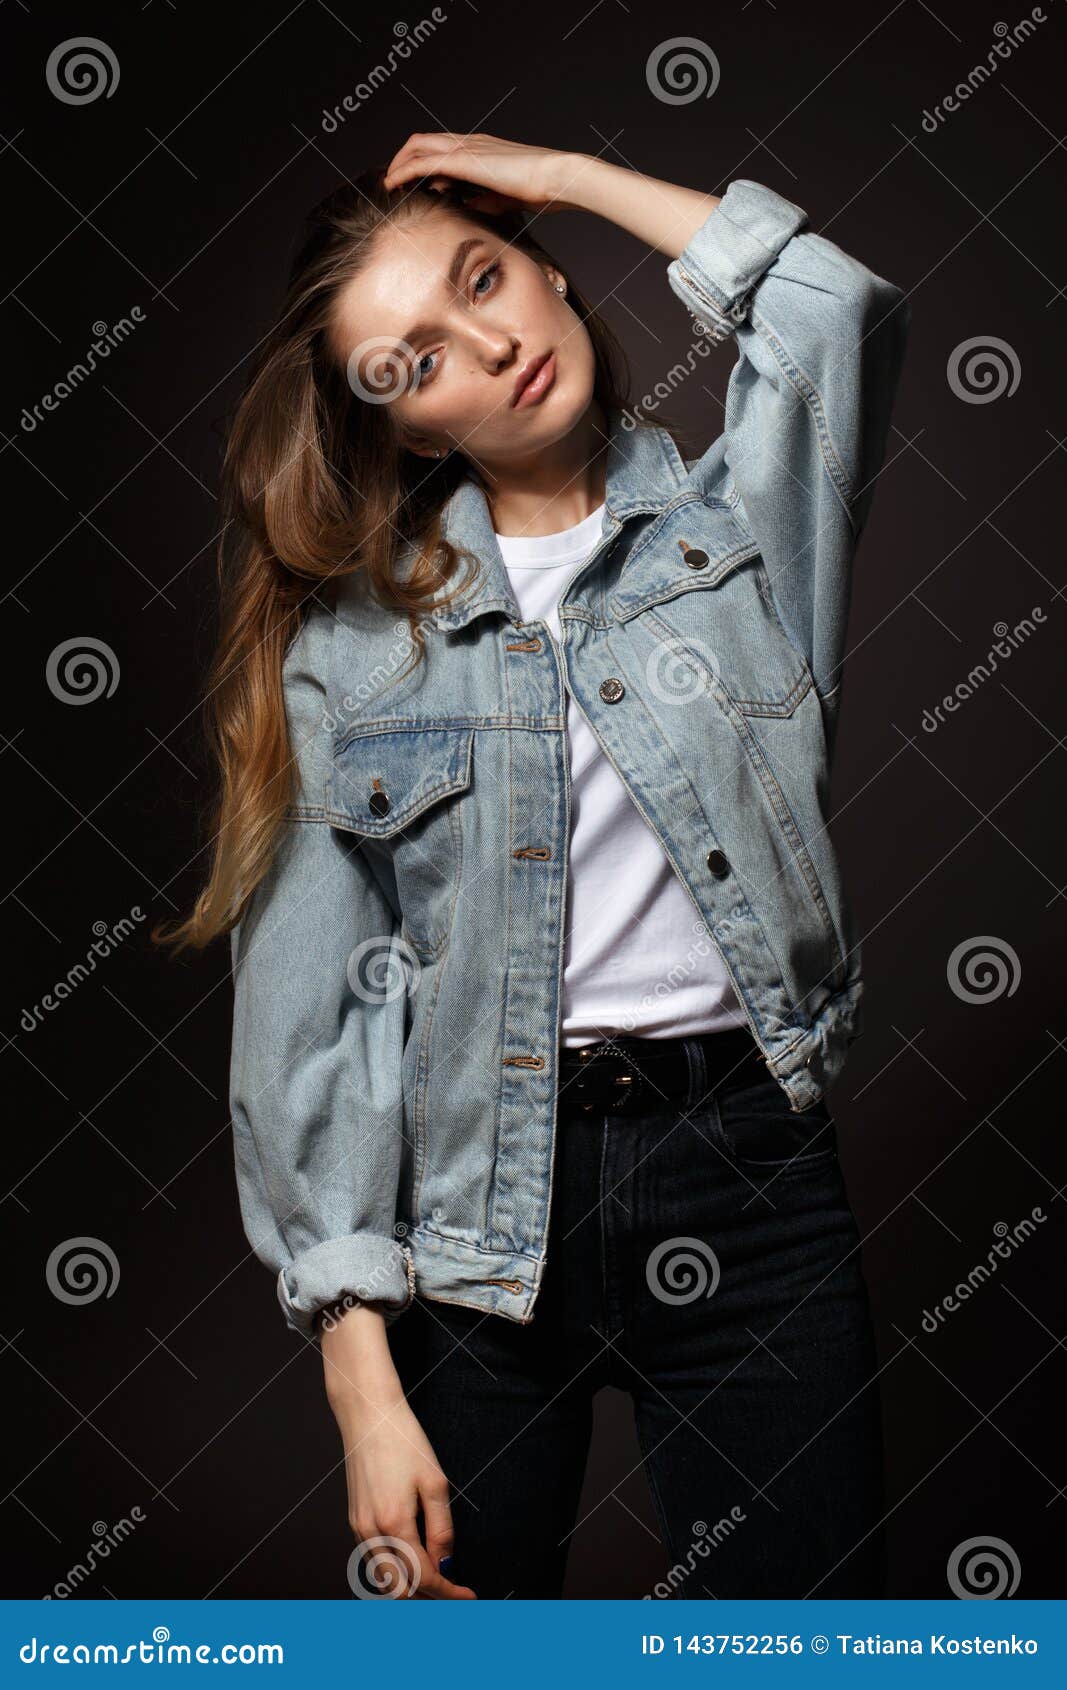 Selective Focus Photo of Woman in Blue Denim Jacket White Top and Black  Bottoms Posing In Front of White Car With Her Eyes Closed  Free Stock Photo